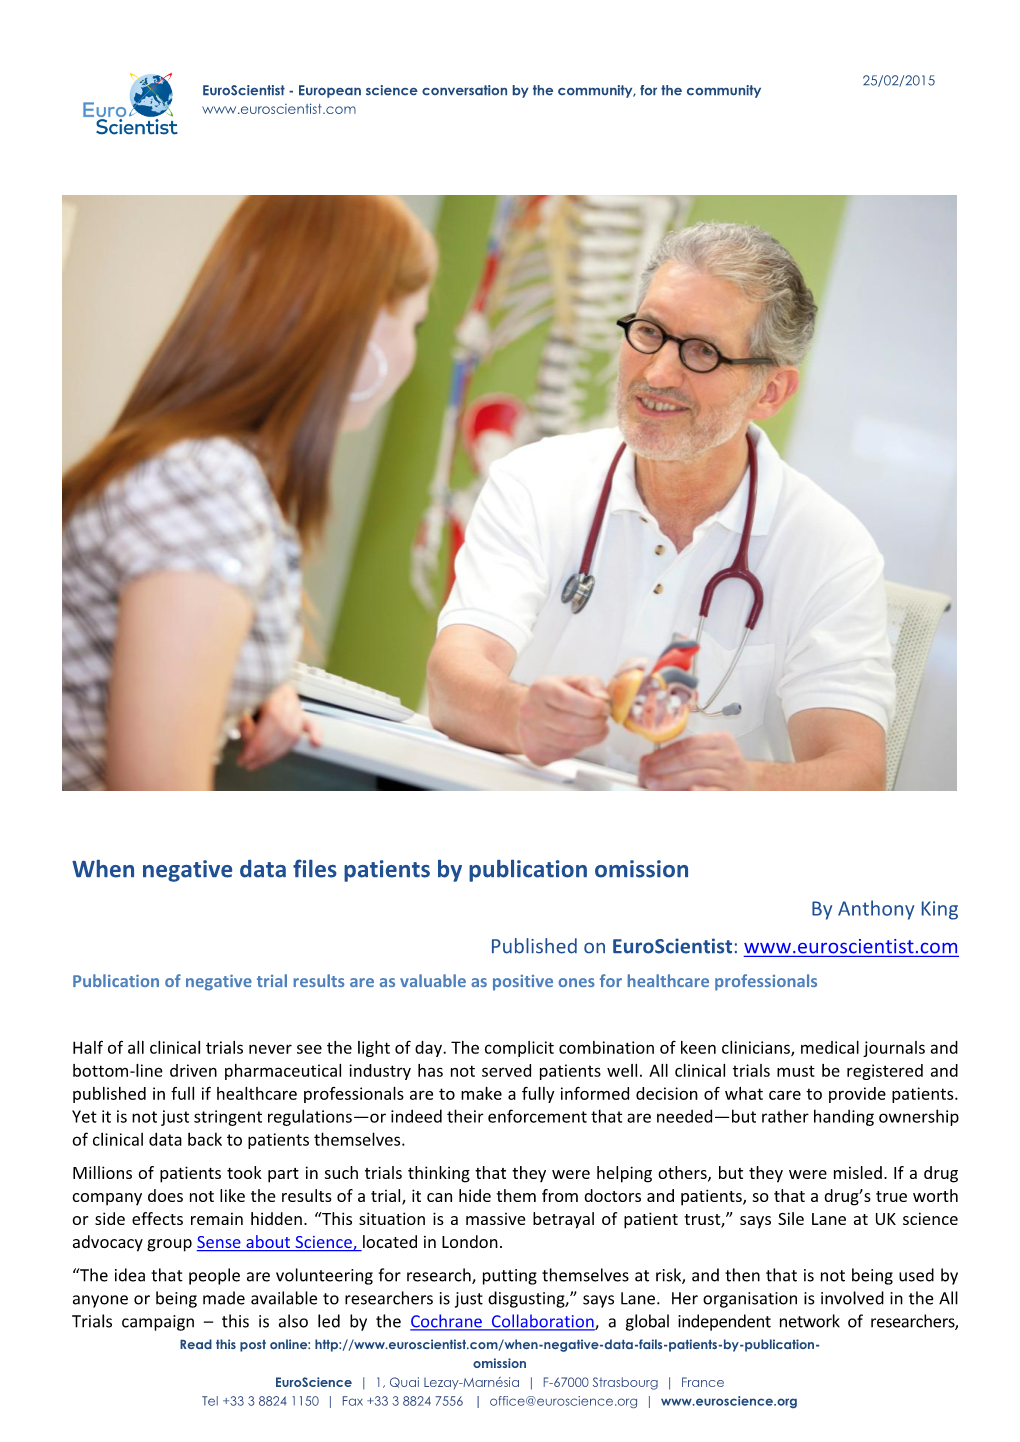 When Negative Data Files Patients by Publication Omission